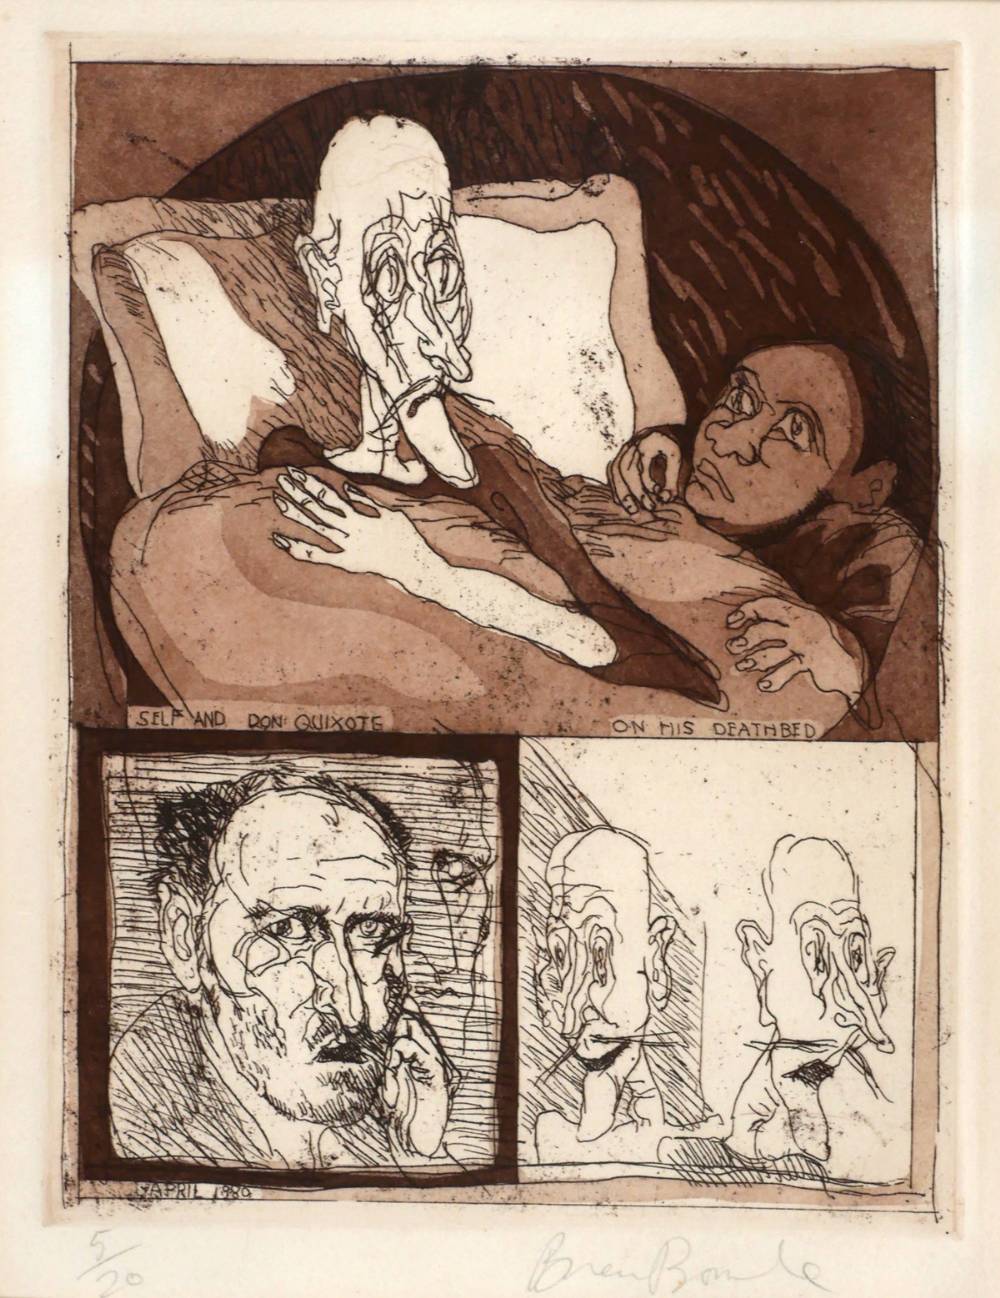 SELF AND DON QUIXOTE ON HIS DEATH-BED, 1980 by Brian Bourke HRHA (b.1936) at Whyte's Auctions